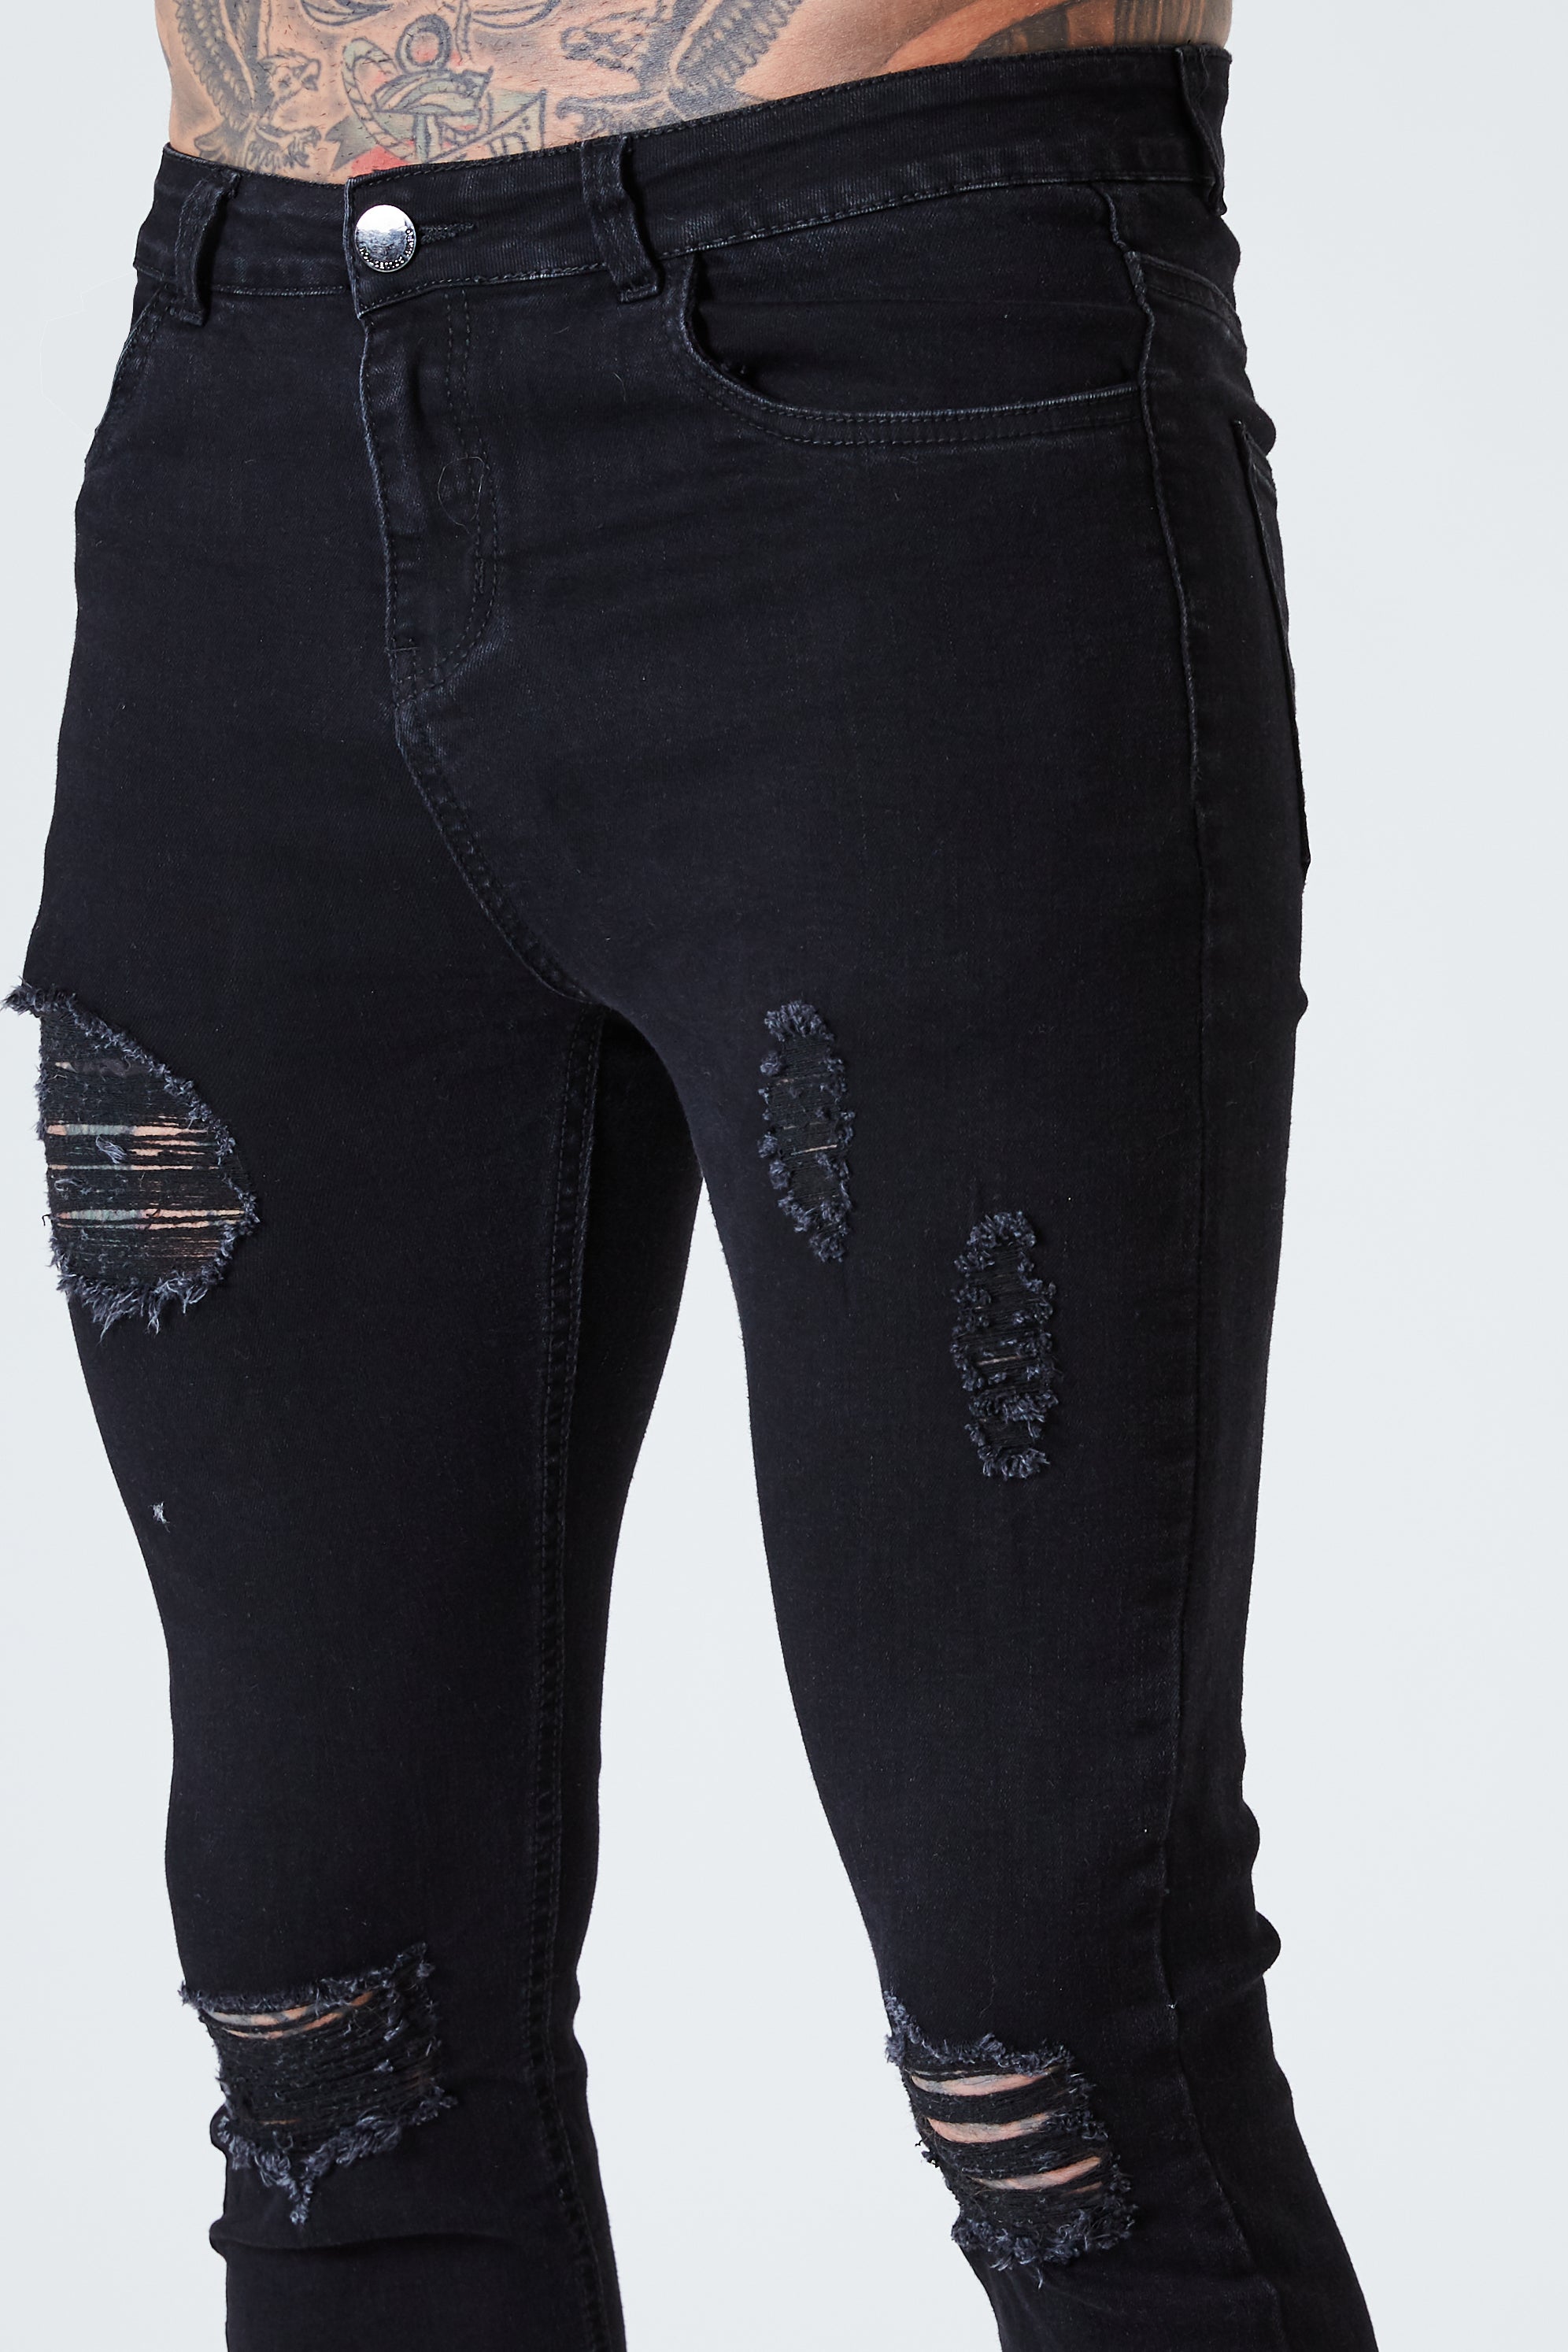 Ripped & Repaired Spray on Jeans - Black - SVPPLY. STUDIOS 